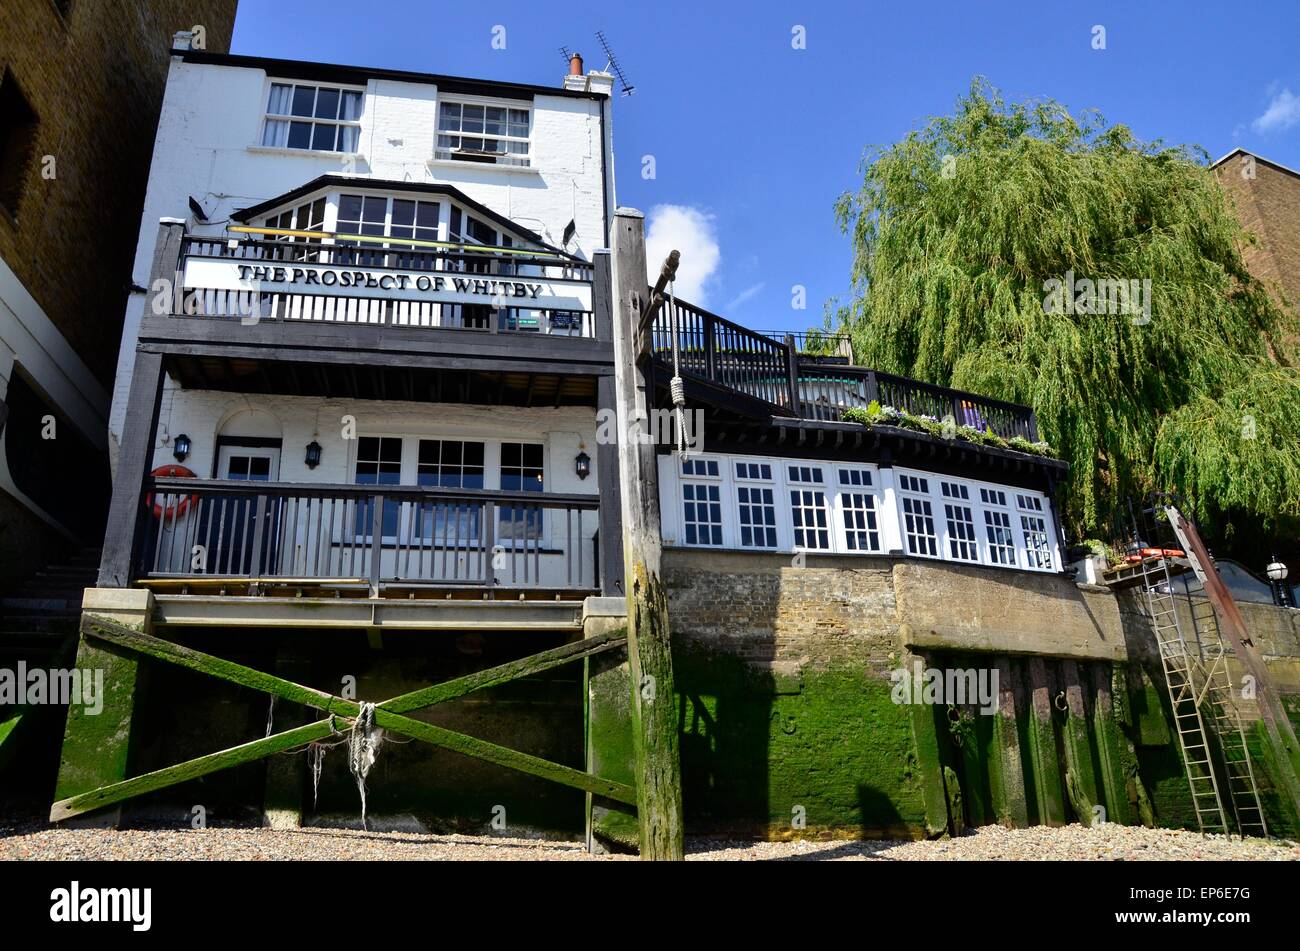 Der Prospect of Whitby-Kneipe, ca. 1520, Wapping Wand, Wapping, London, England, UK Stockfoto